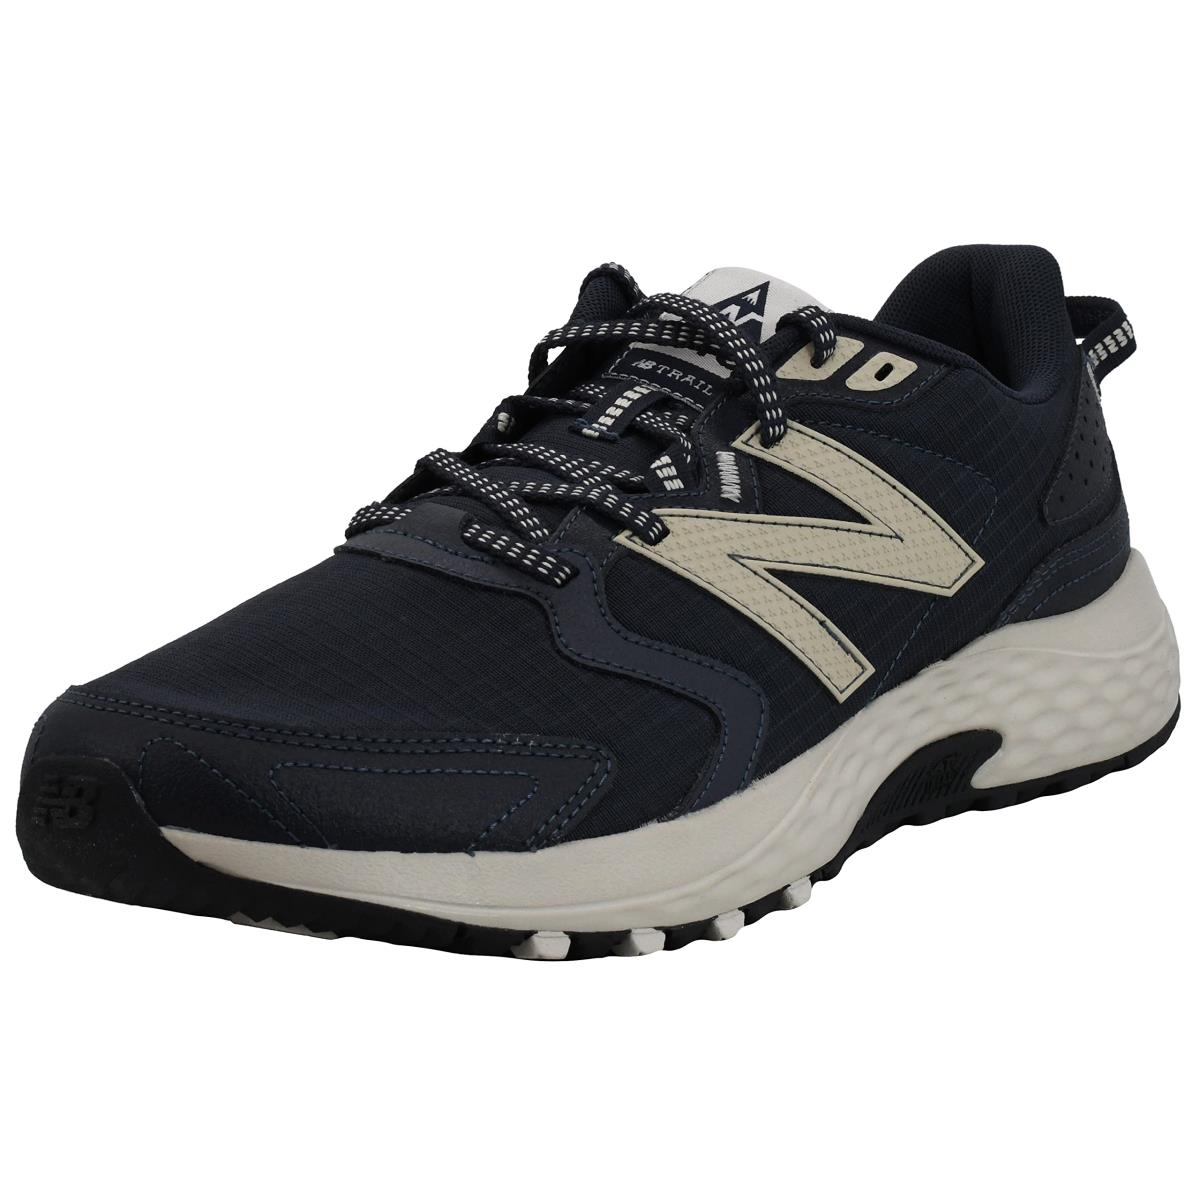 New Balance Men`s 410 V7 Trail Running Shoe Outerspace/Timberwolf/Black